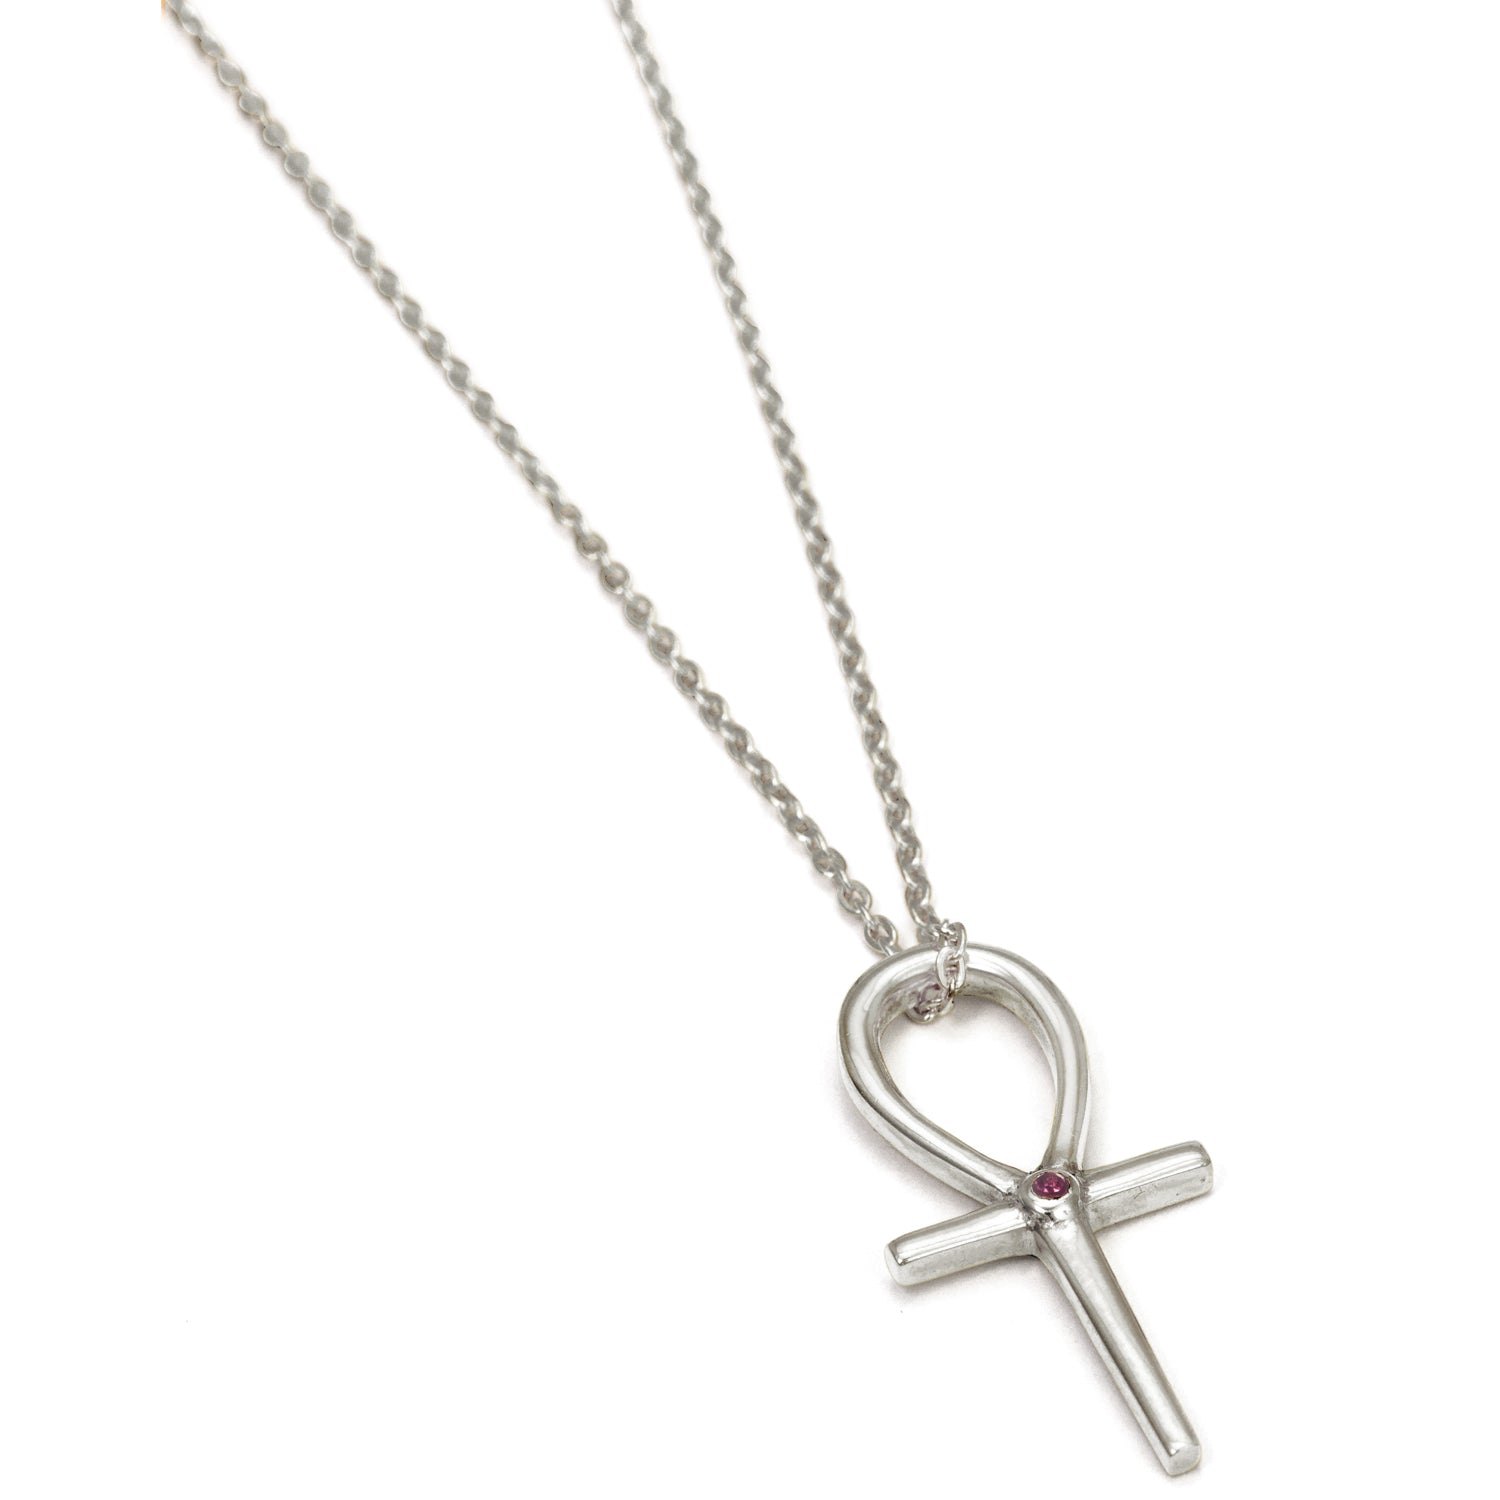 Ankh pendant silver with ruby - key of life